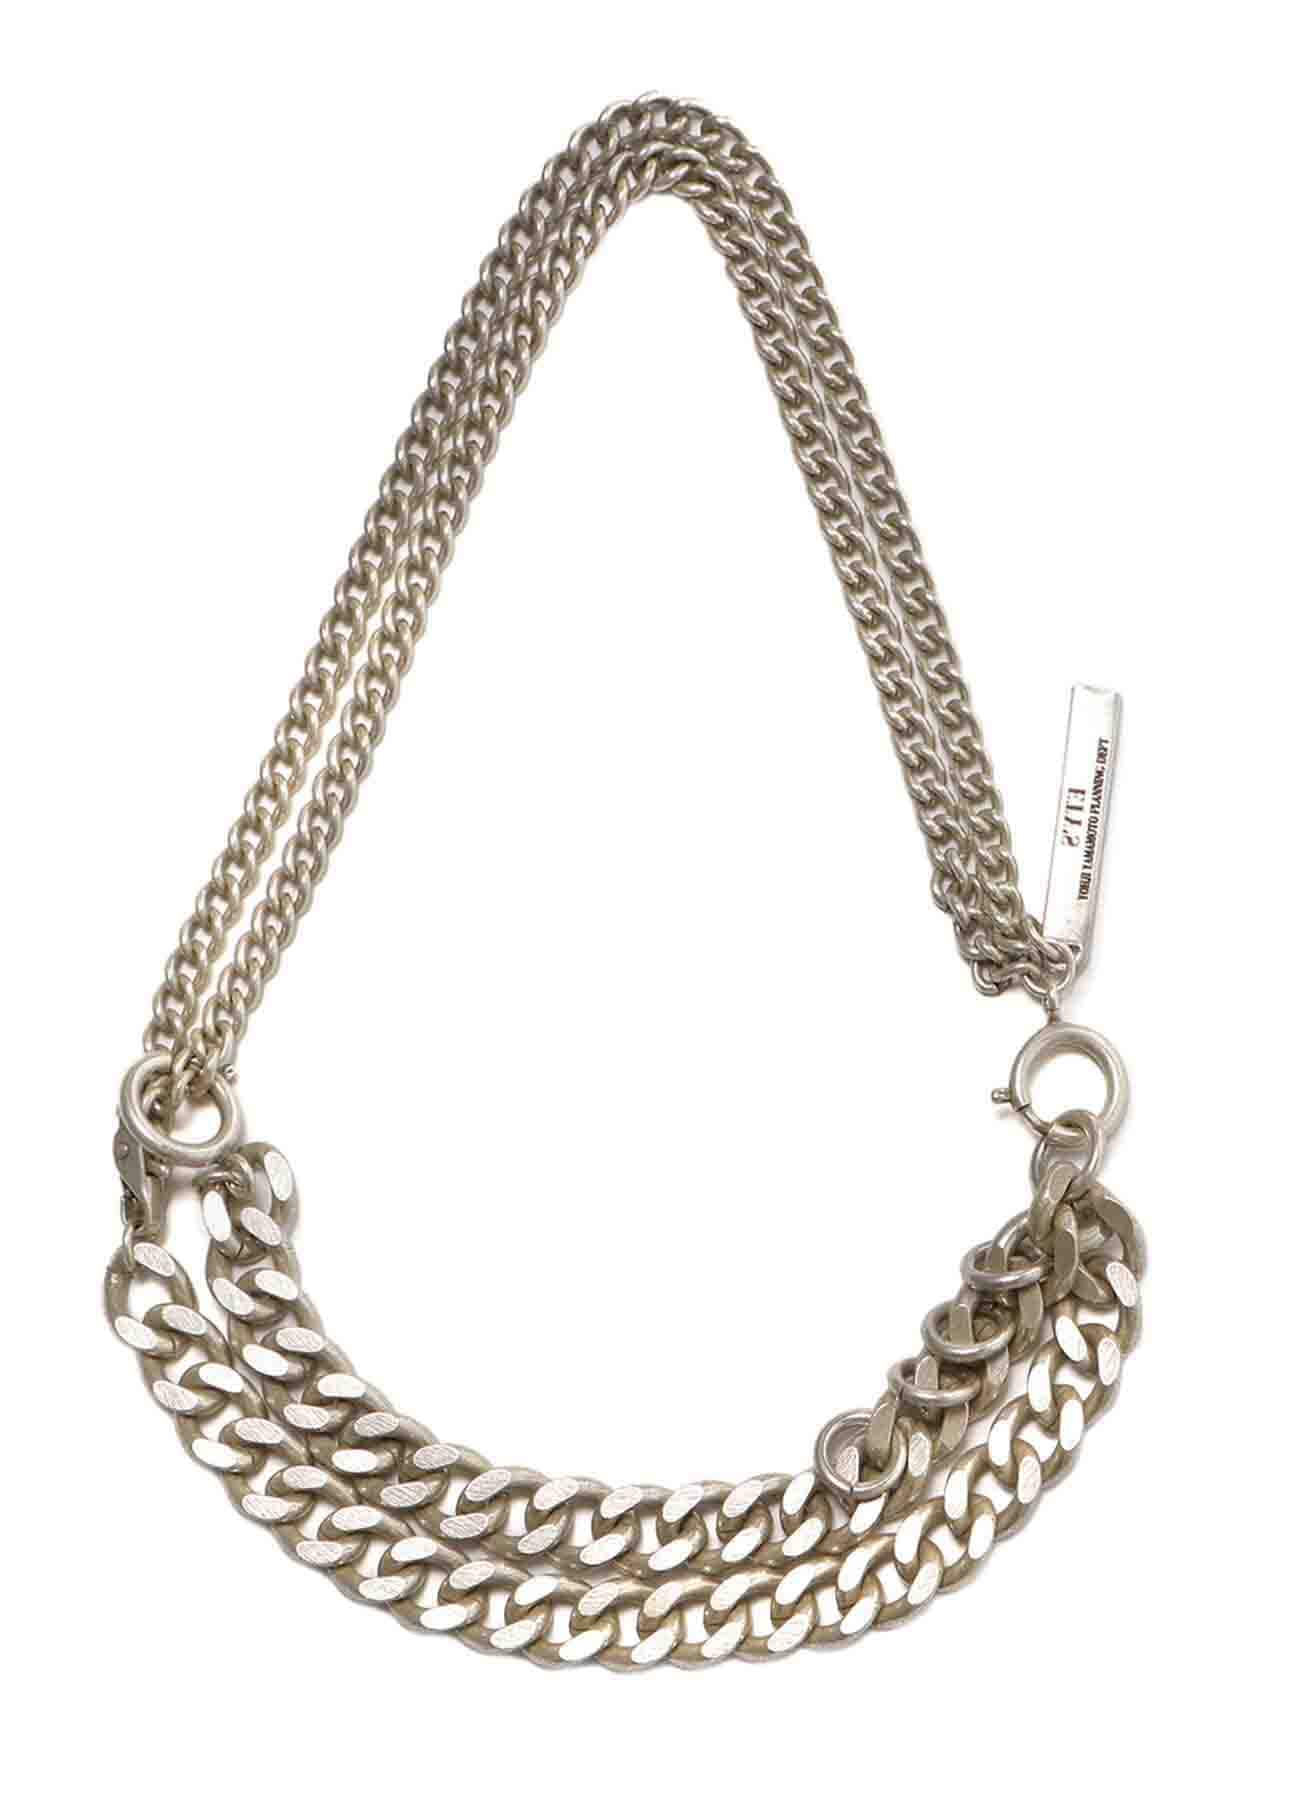 6-WAY CURVED CHAIN BRACELET NECKLACE(FREE SIZE Antique Silver): S 